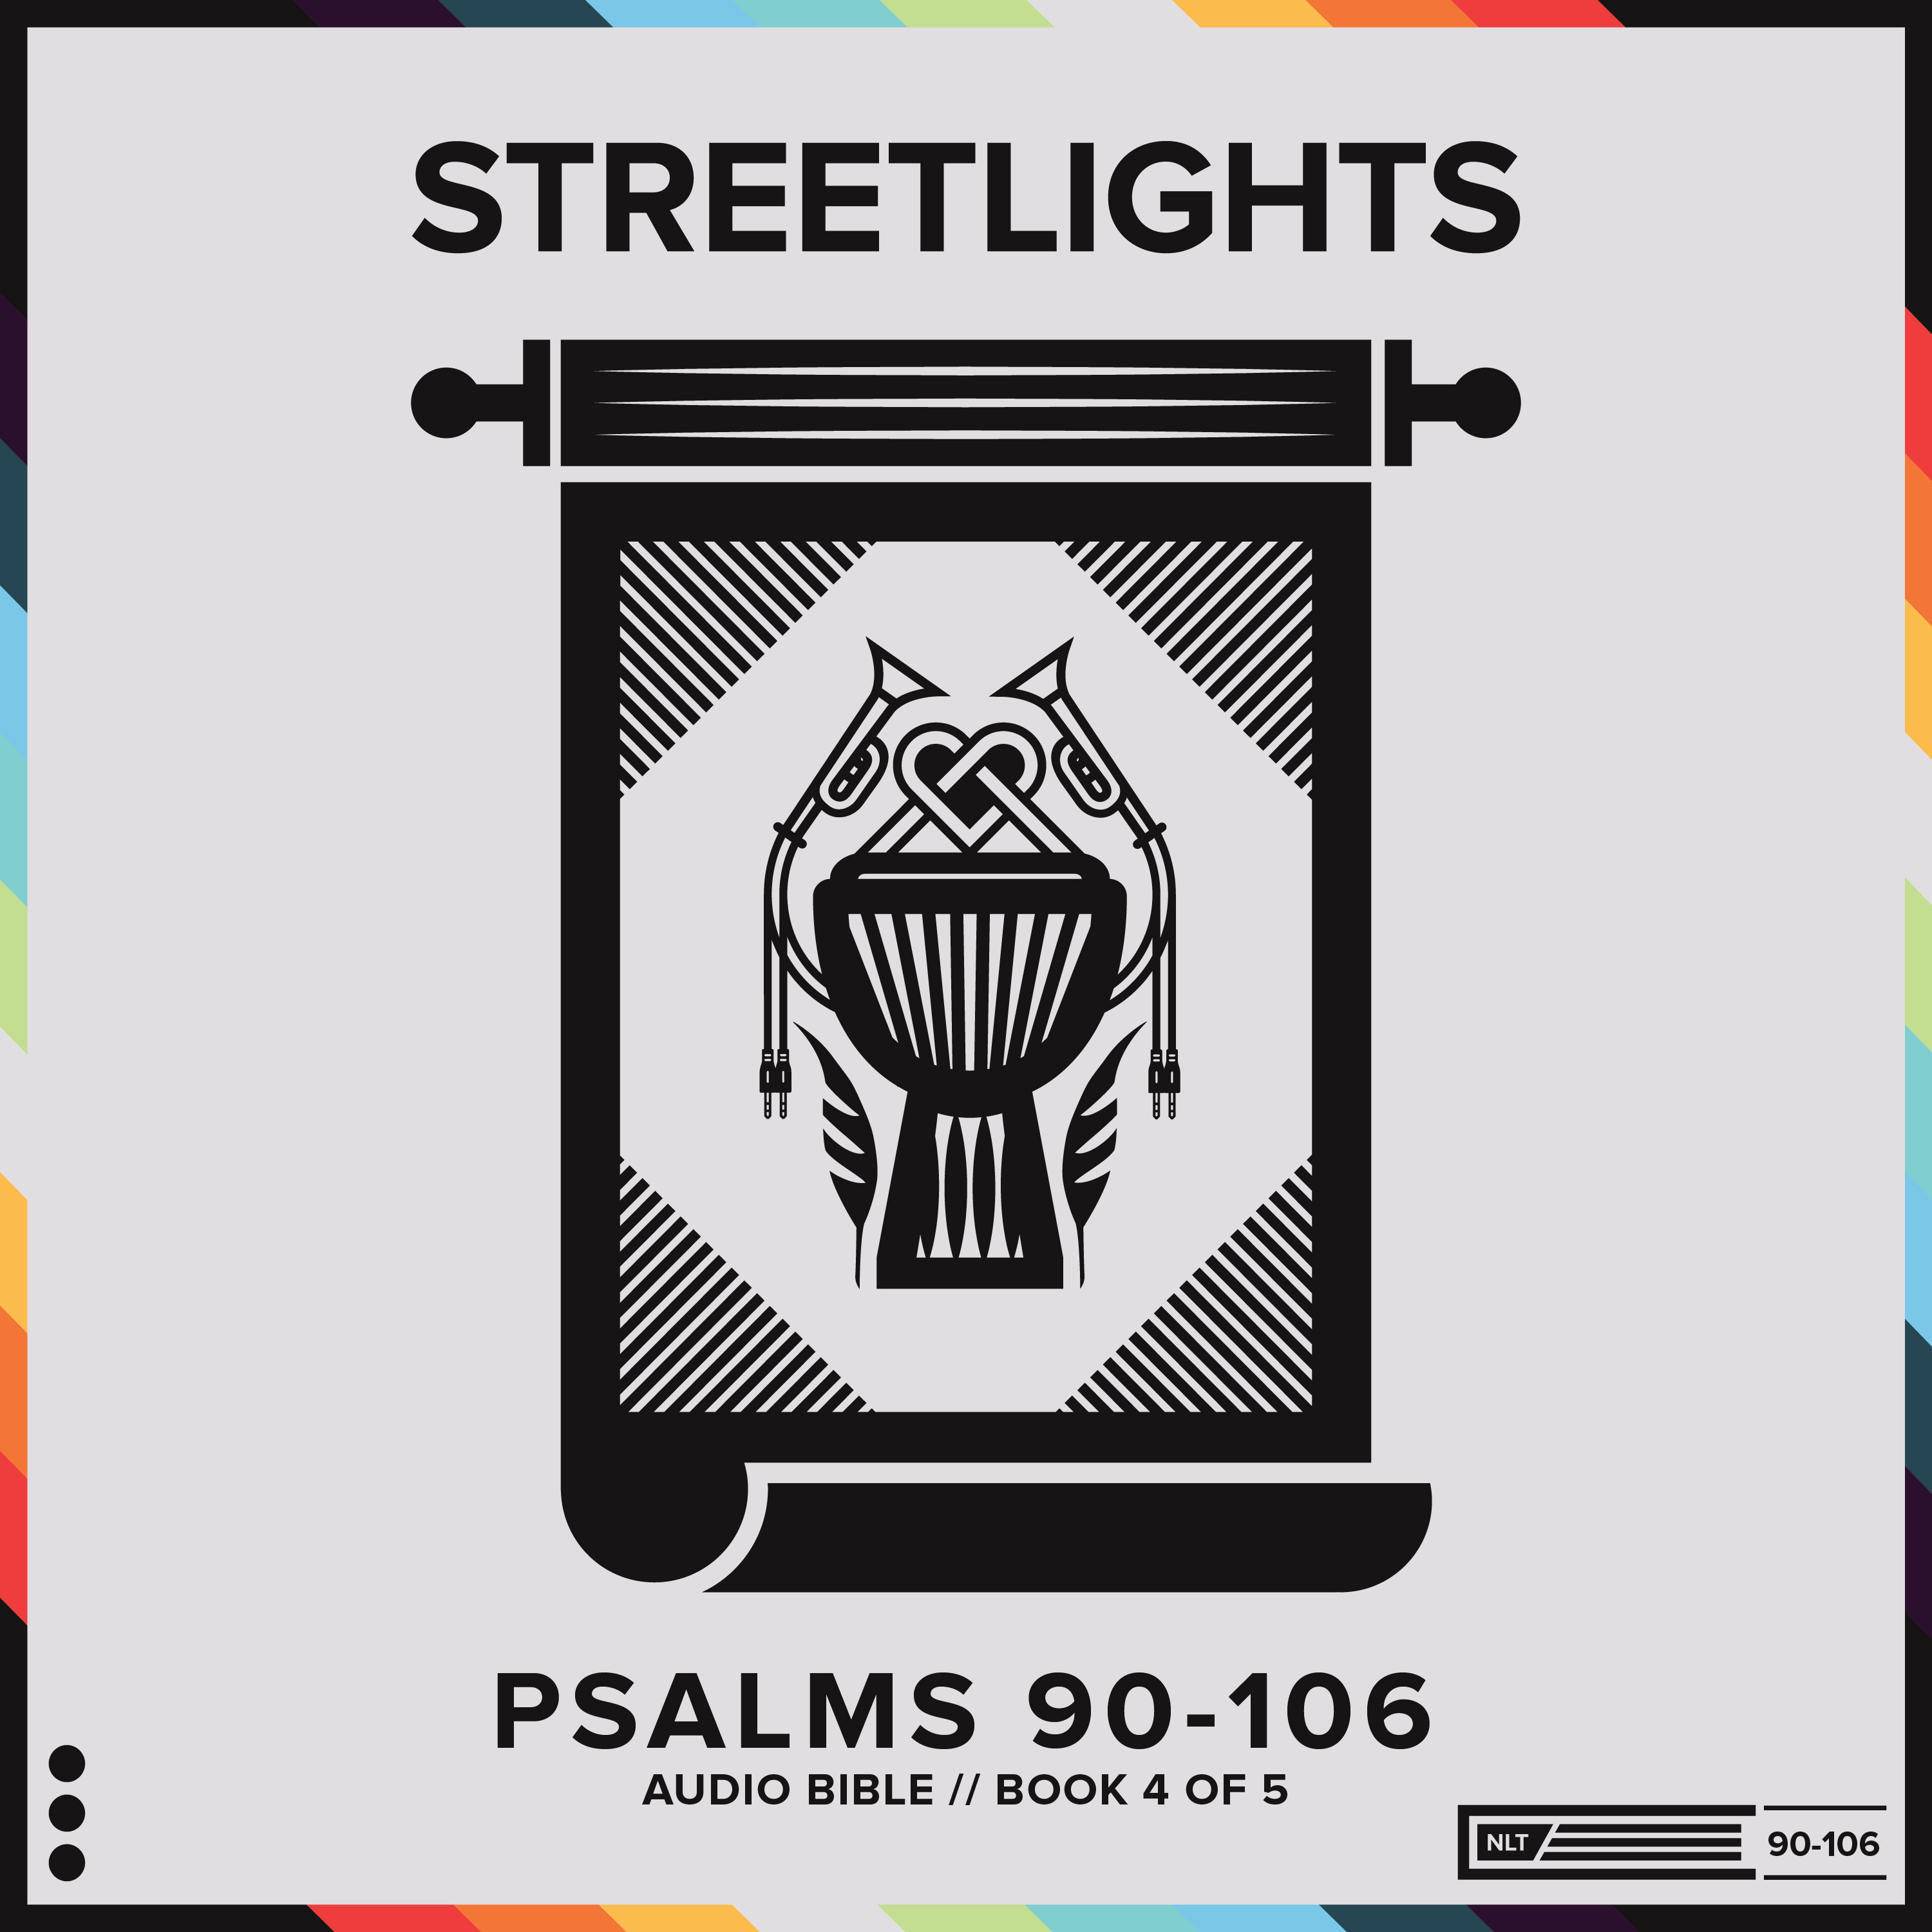 Art for Psalm 91 by Streetlights Bible